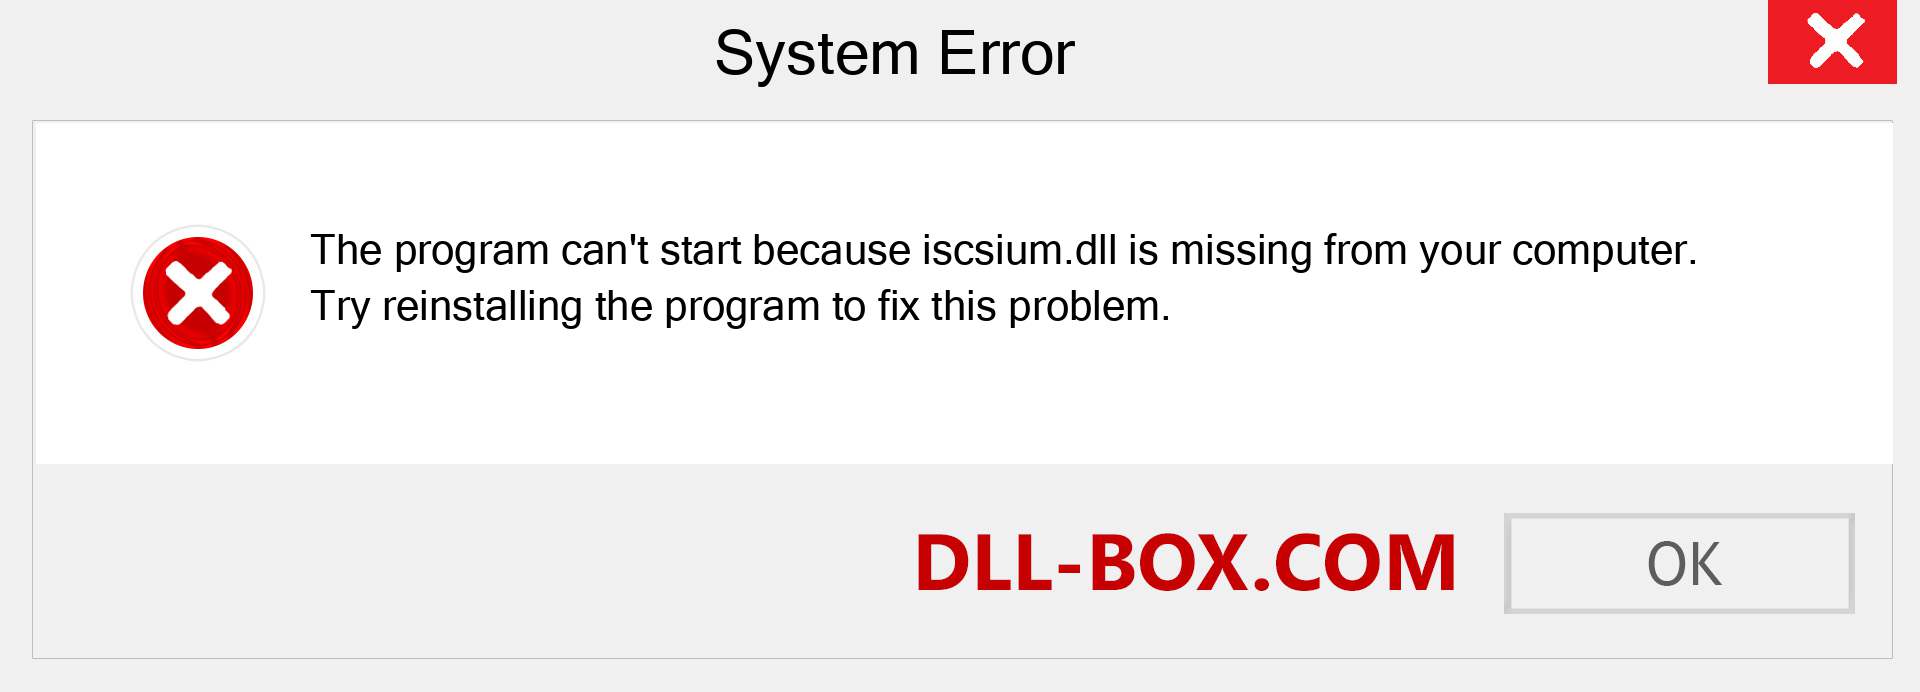  iscsium.dll file is missing?. Download for Windows 7, 8, 10 - Fix  iscsium dll Missing Error on Windows, photos, images